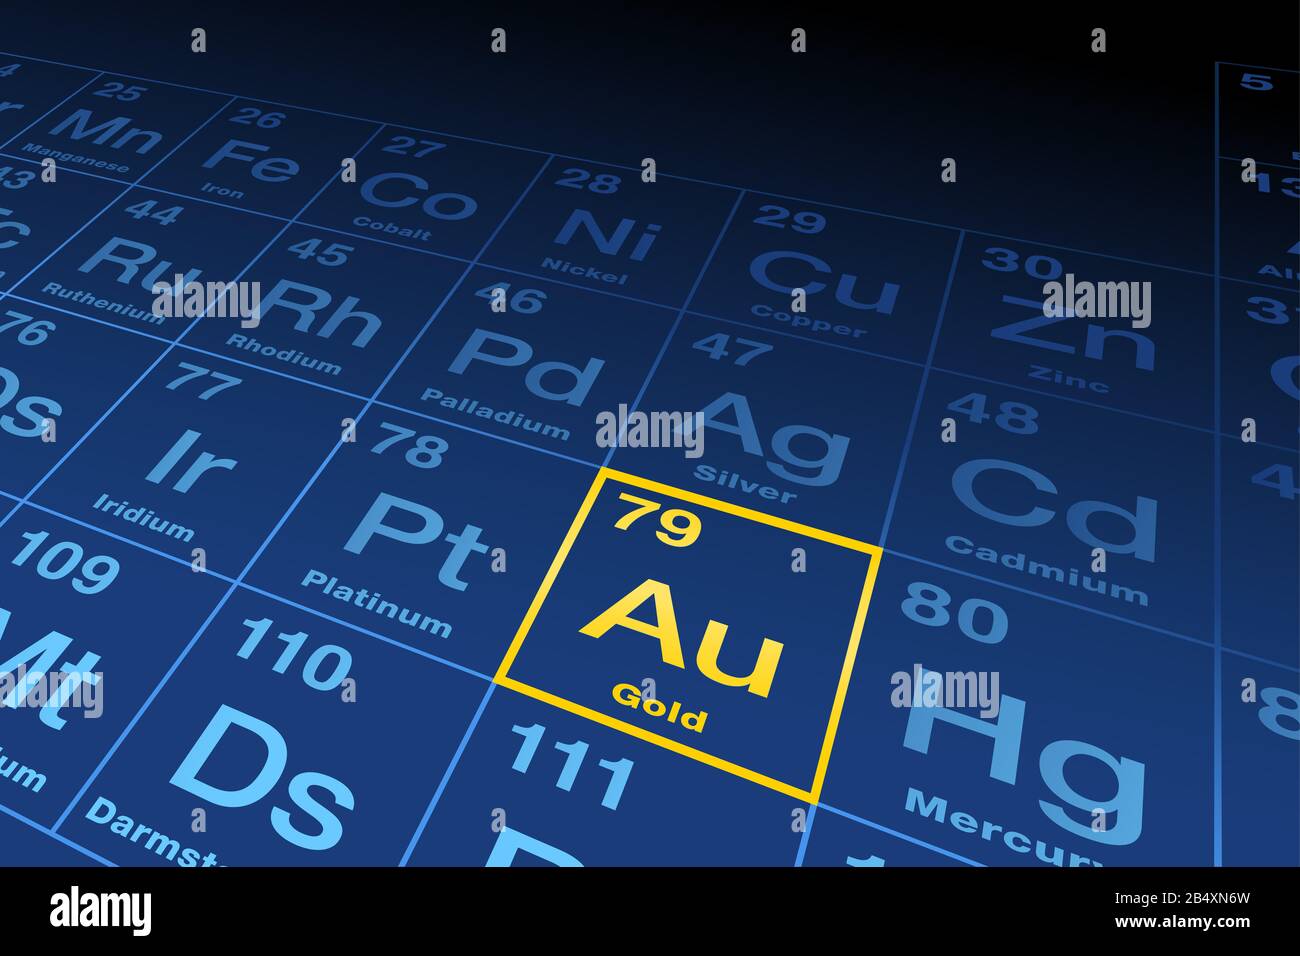 Element gold on the periodic table of elements. Chemical element with the Latin name aurum, symbol Au and atomic number 79, a transition metal. Stock Photo